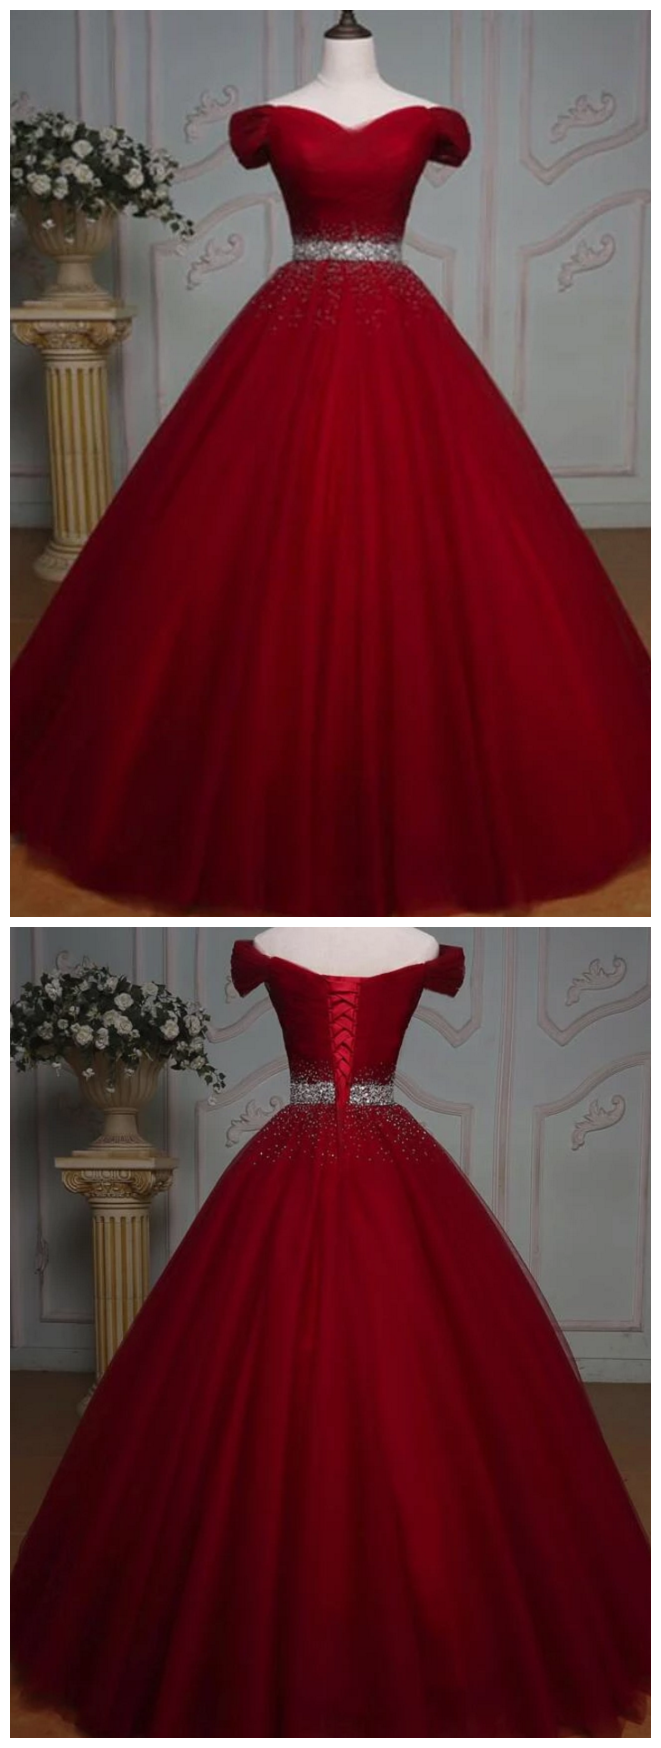 Dark Red Tulle Gorgeous Ball Gown, Burgundy Off Shoulder With Beaded Waist, Pretty Formal Dress